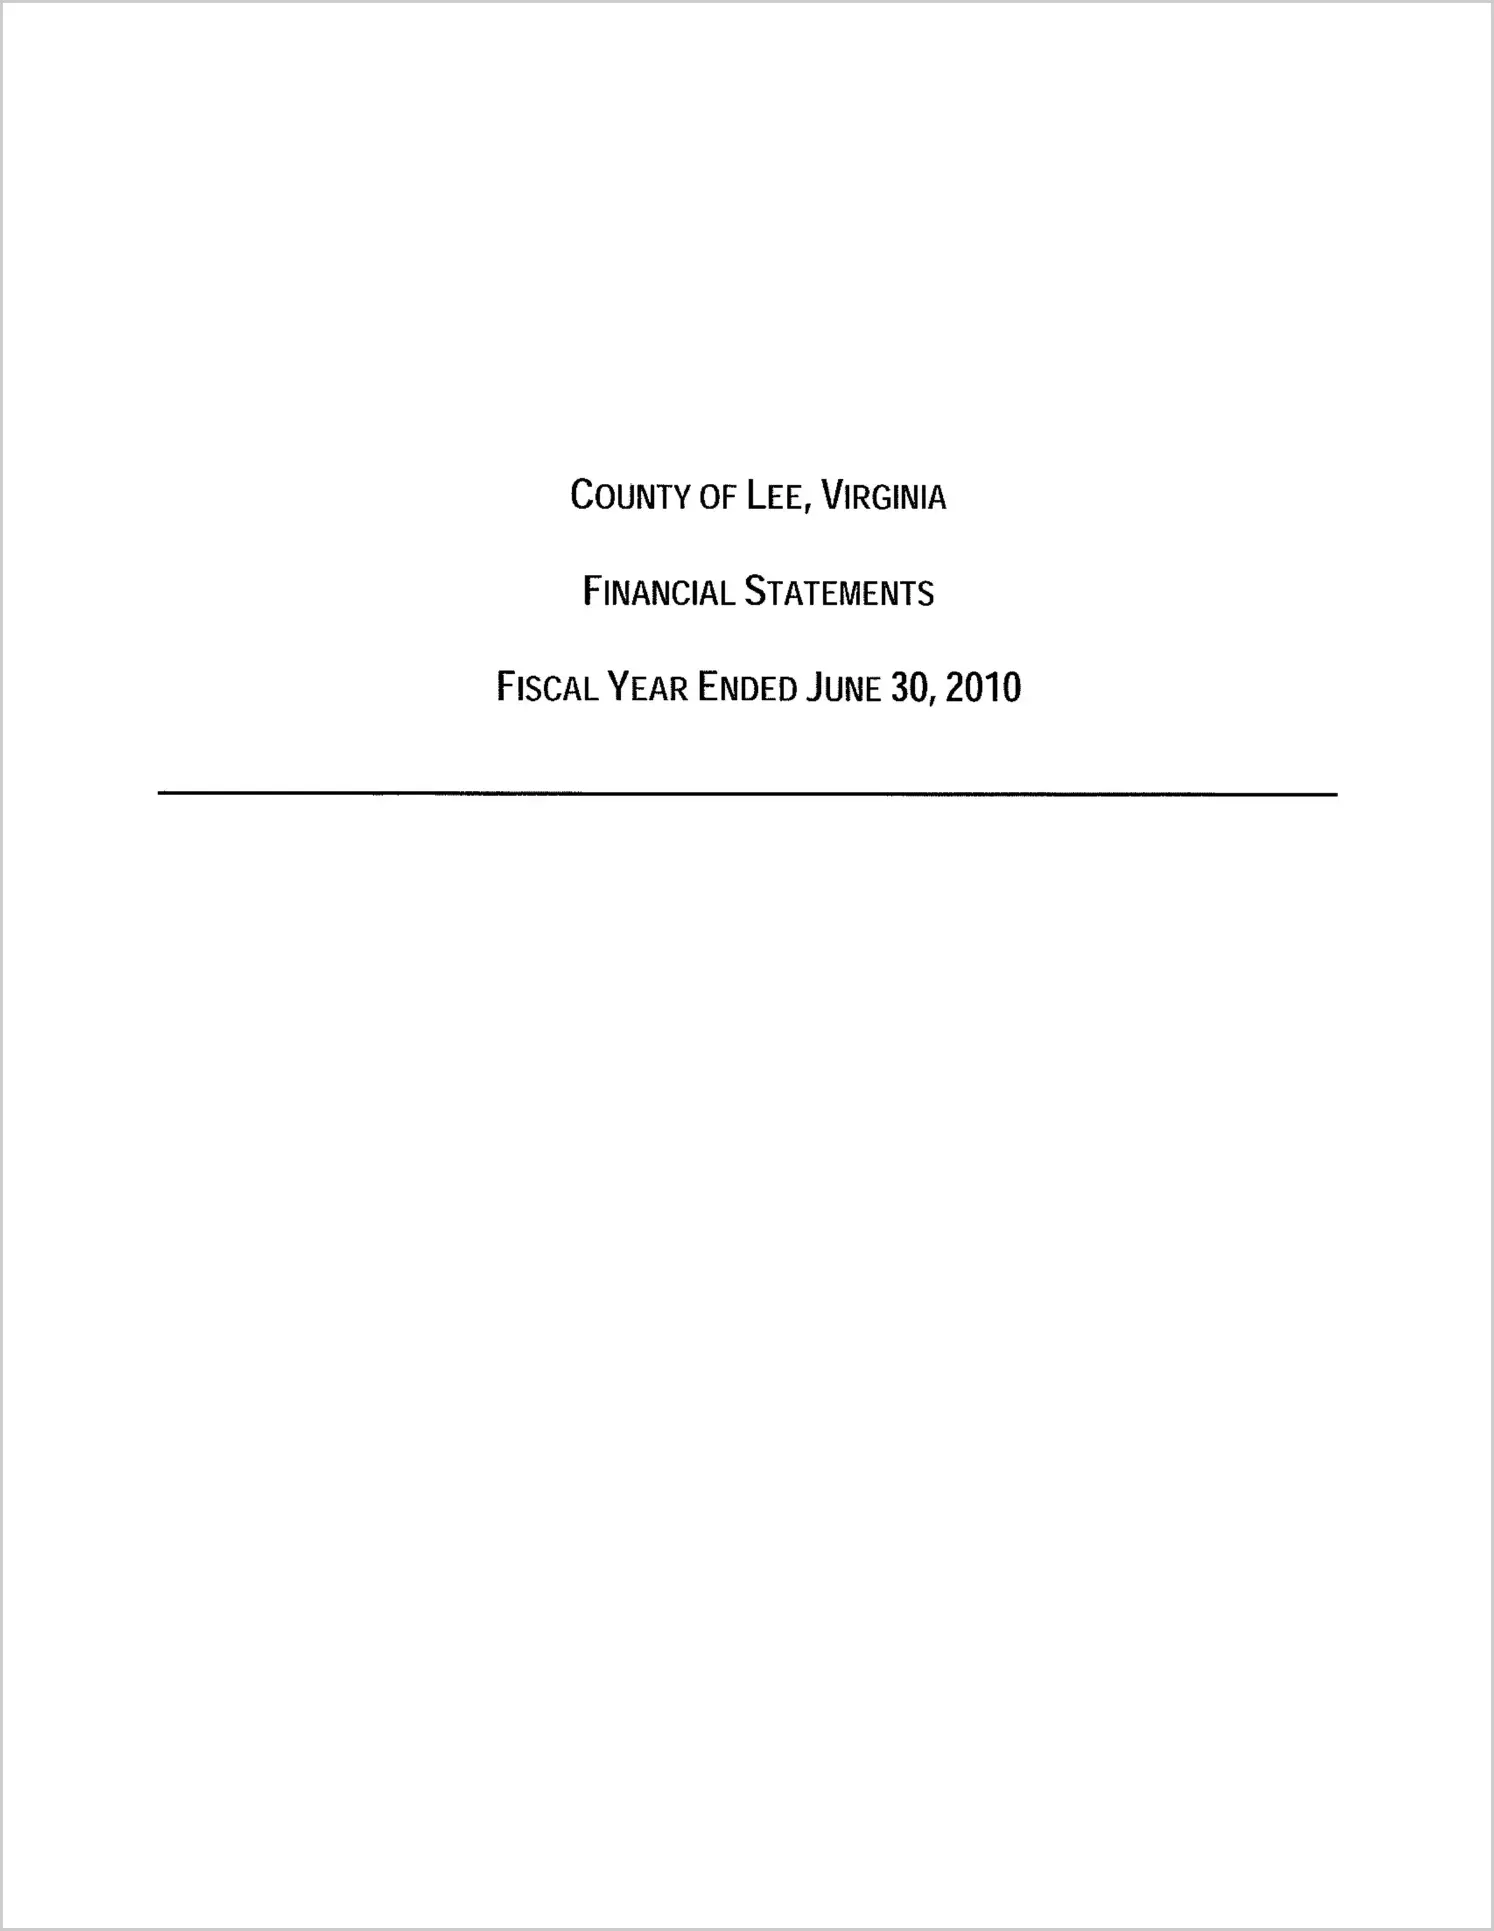 2010 Annual Financial Report for County of Lee